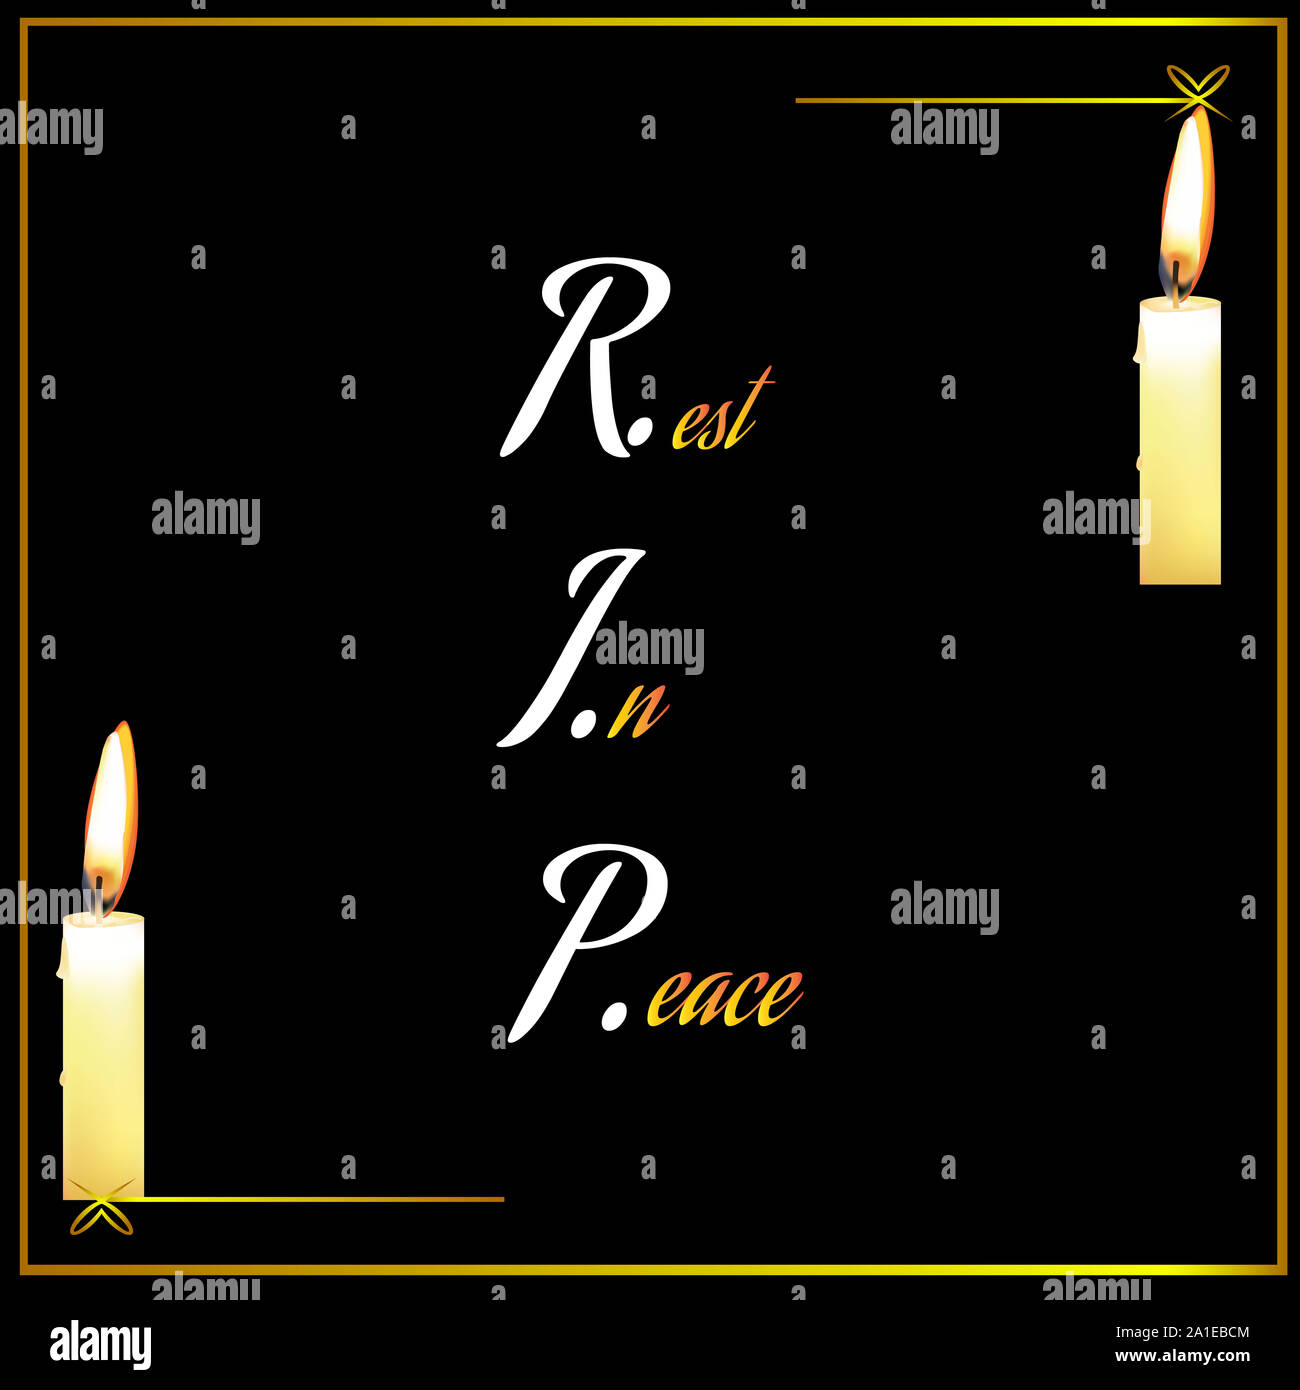 Rip Rest In Peace Background With Golden Frame And Candles Light Stock Photo Alamy March 8, photo frame yellow flowers, birds, green number eight. https www alamy com rip rest in peace background with golden frame and candles light image327927956 html